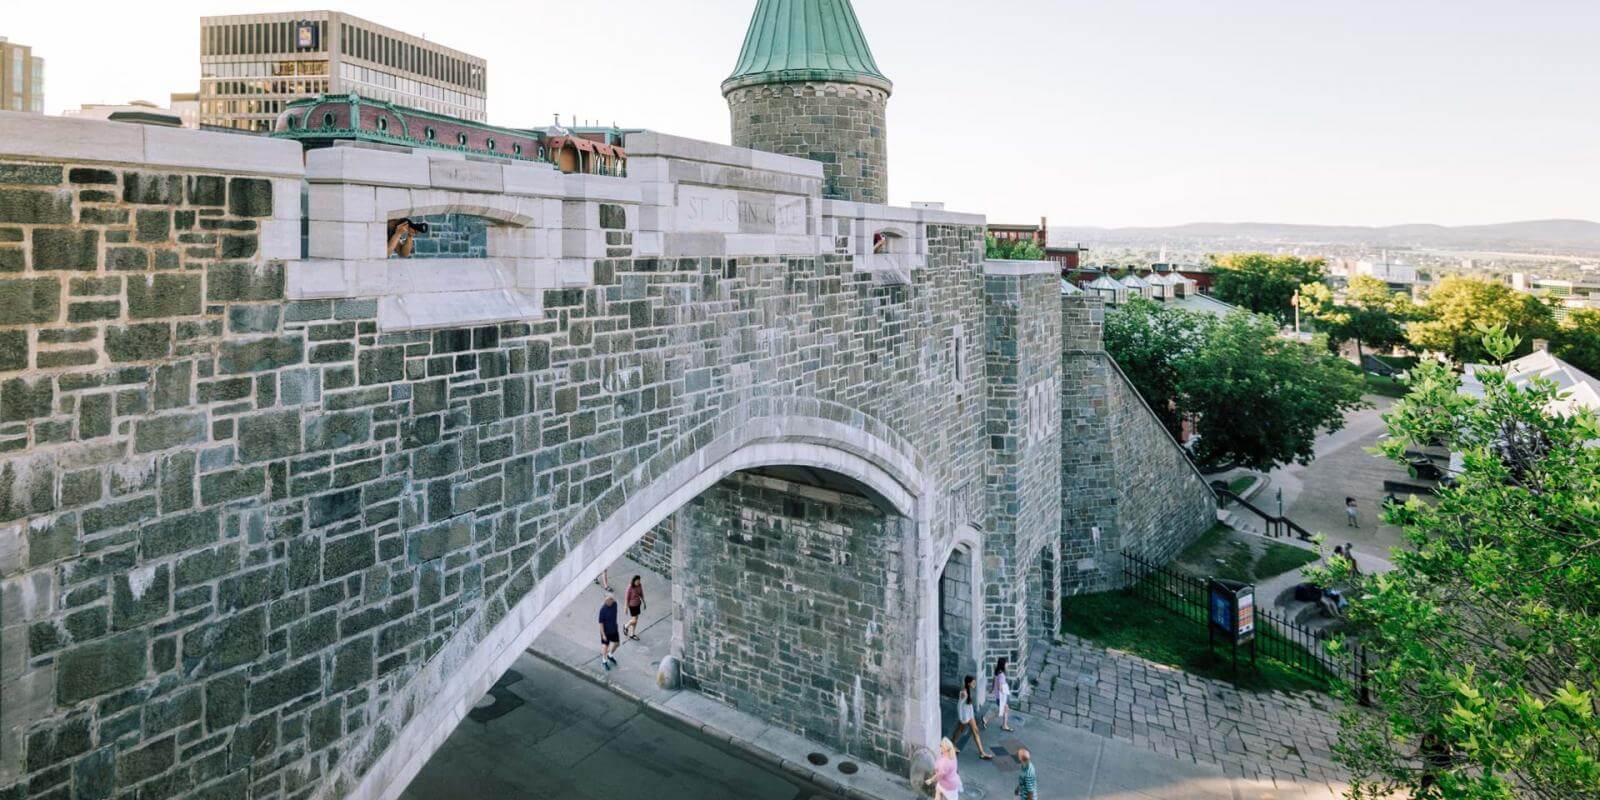 The Quebec Wall